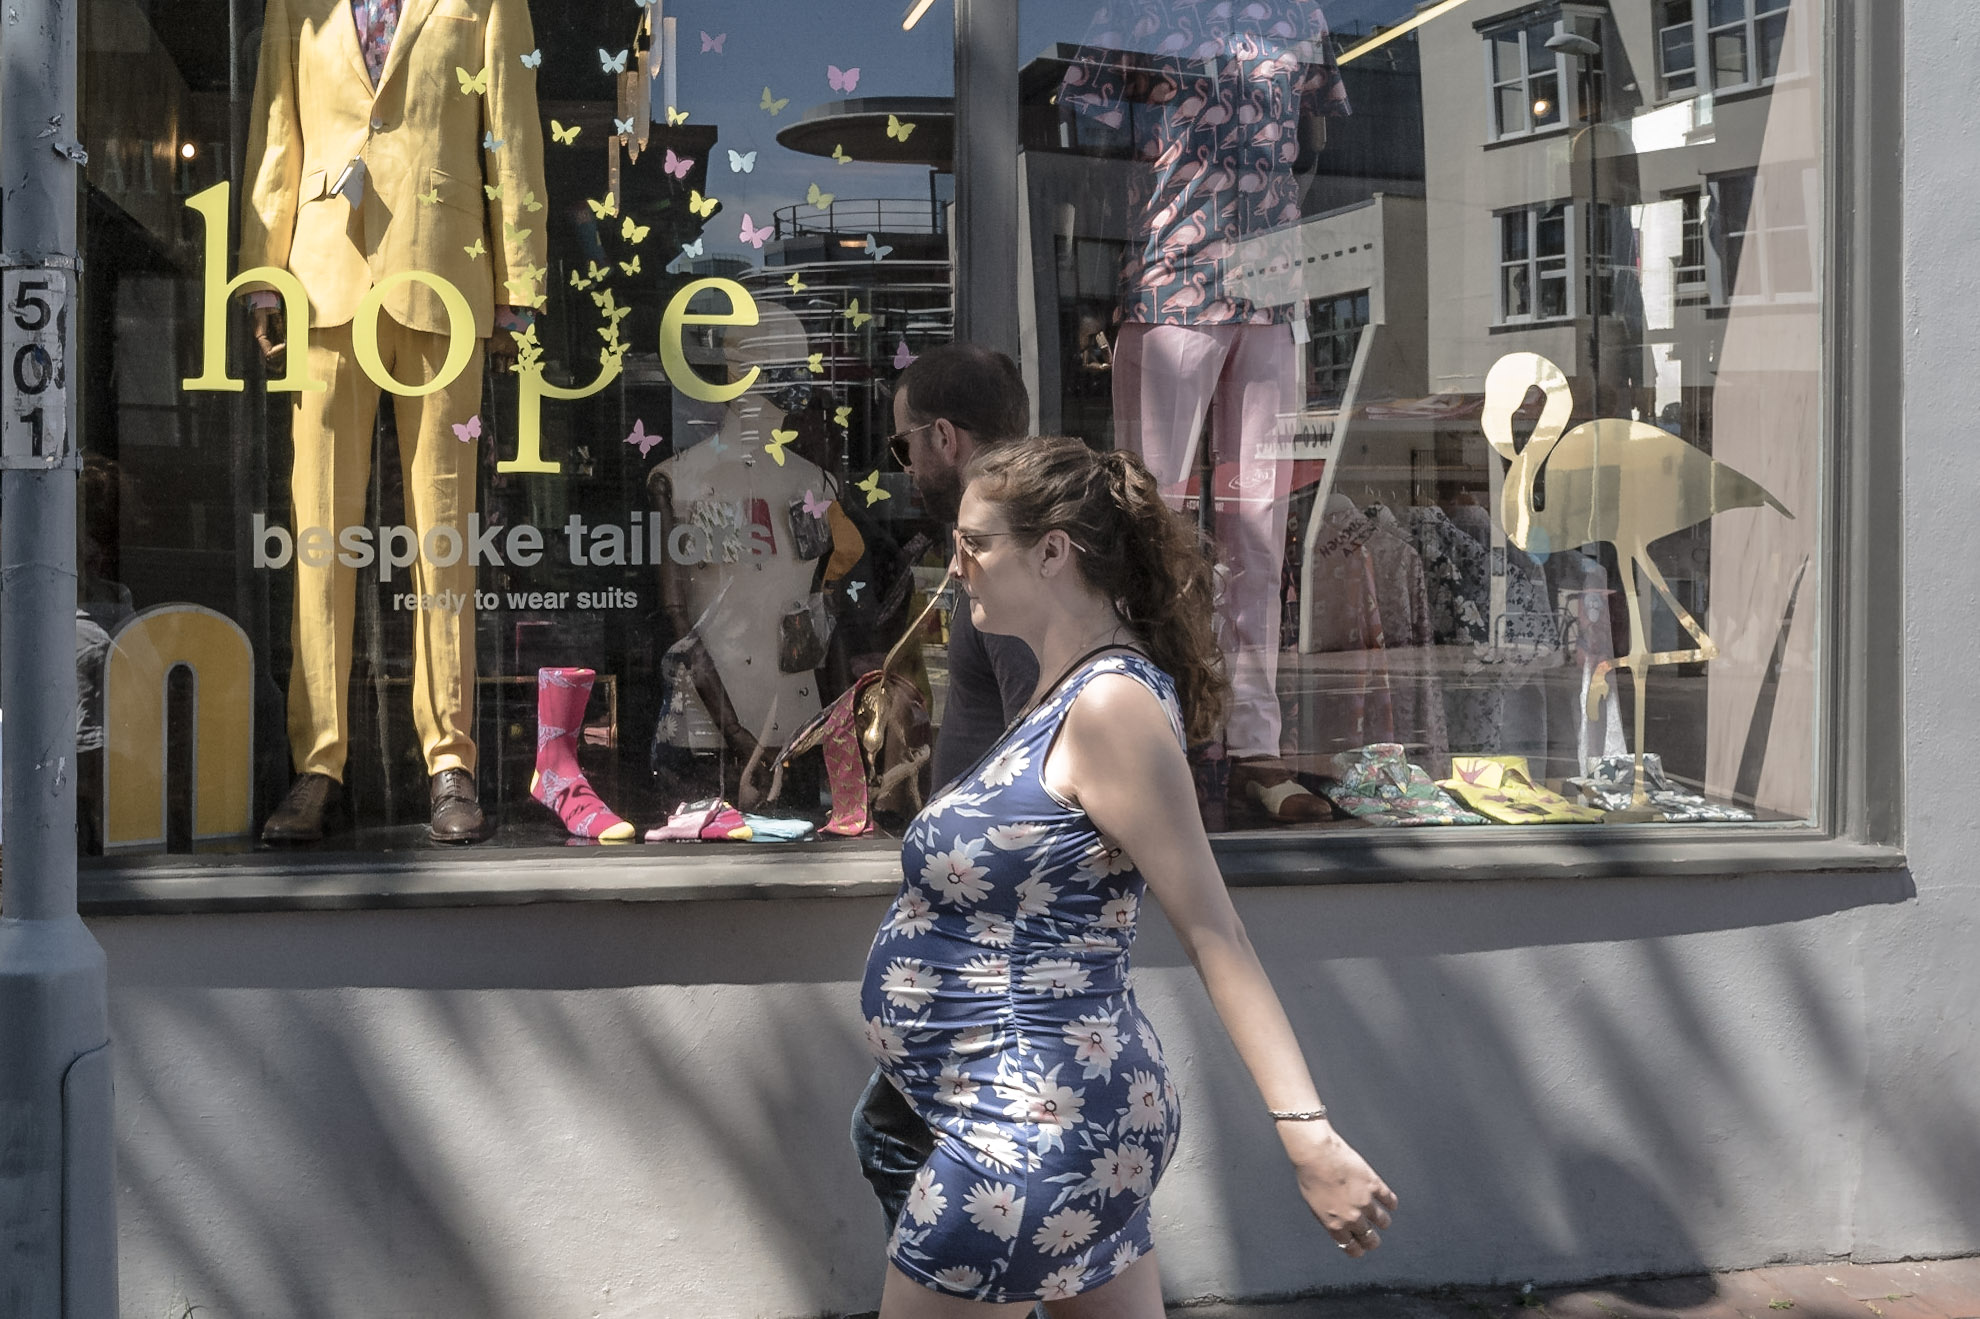 The pregnant woman walking by, by Mark Heathcote